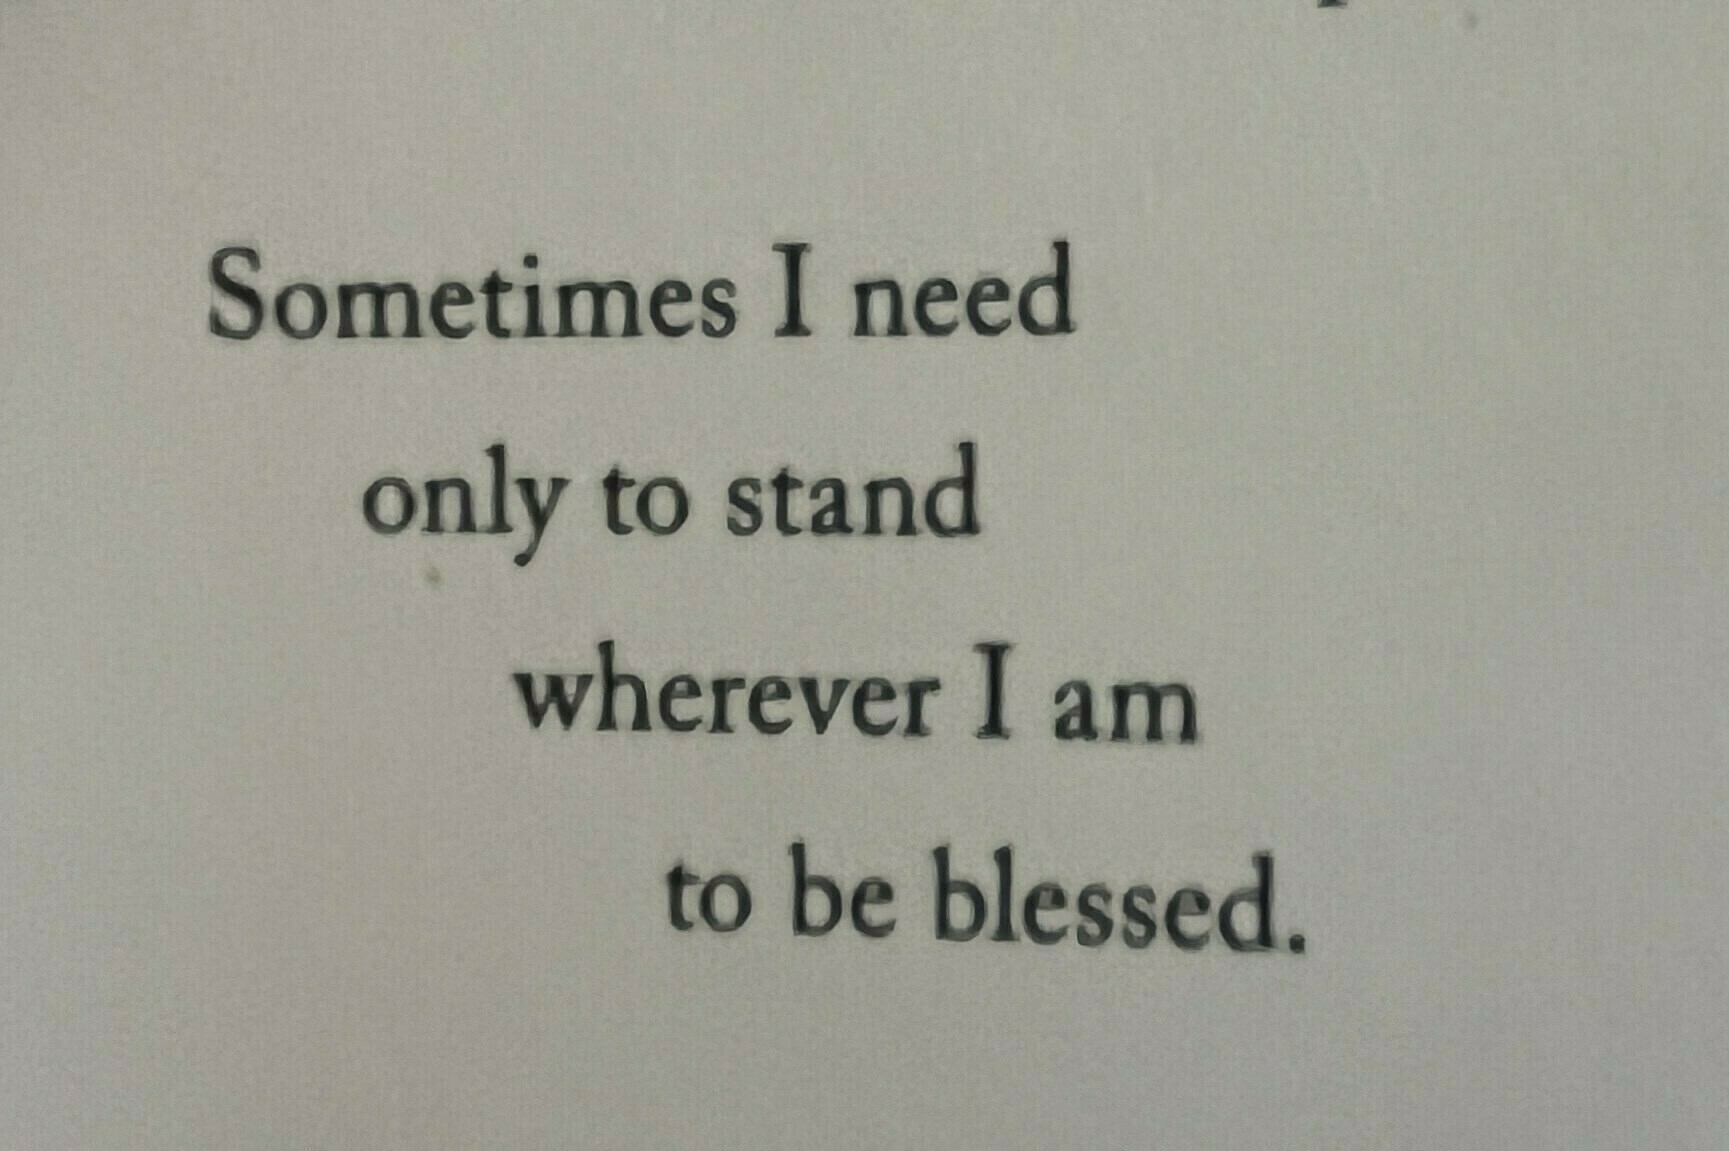 Photo of text from a poem: Sometimes I need only to stand wherever I am to be blessed